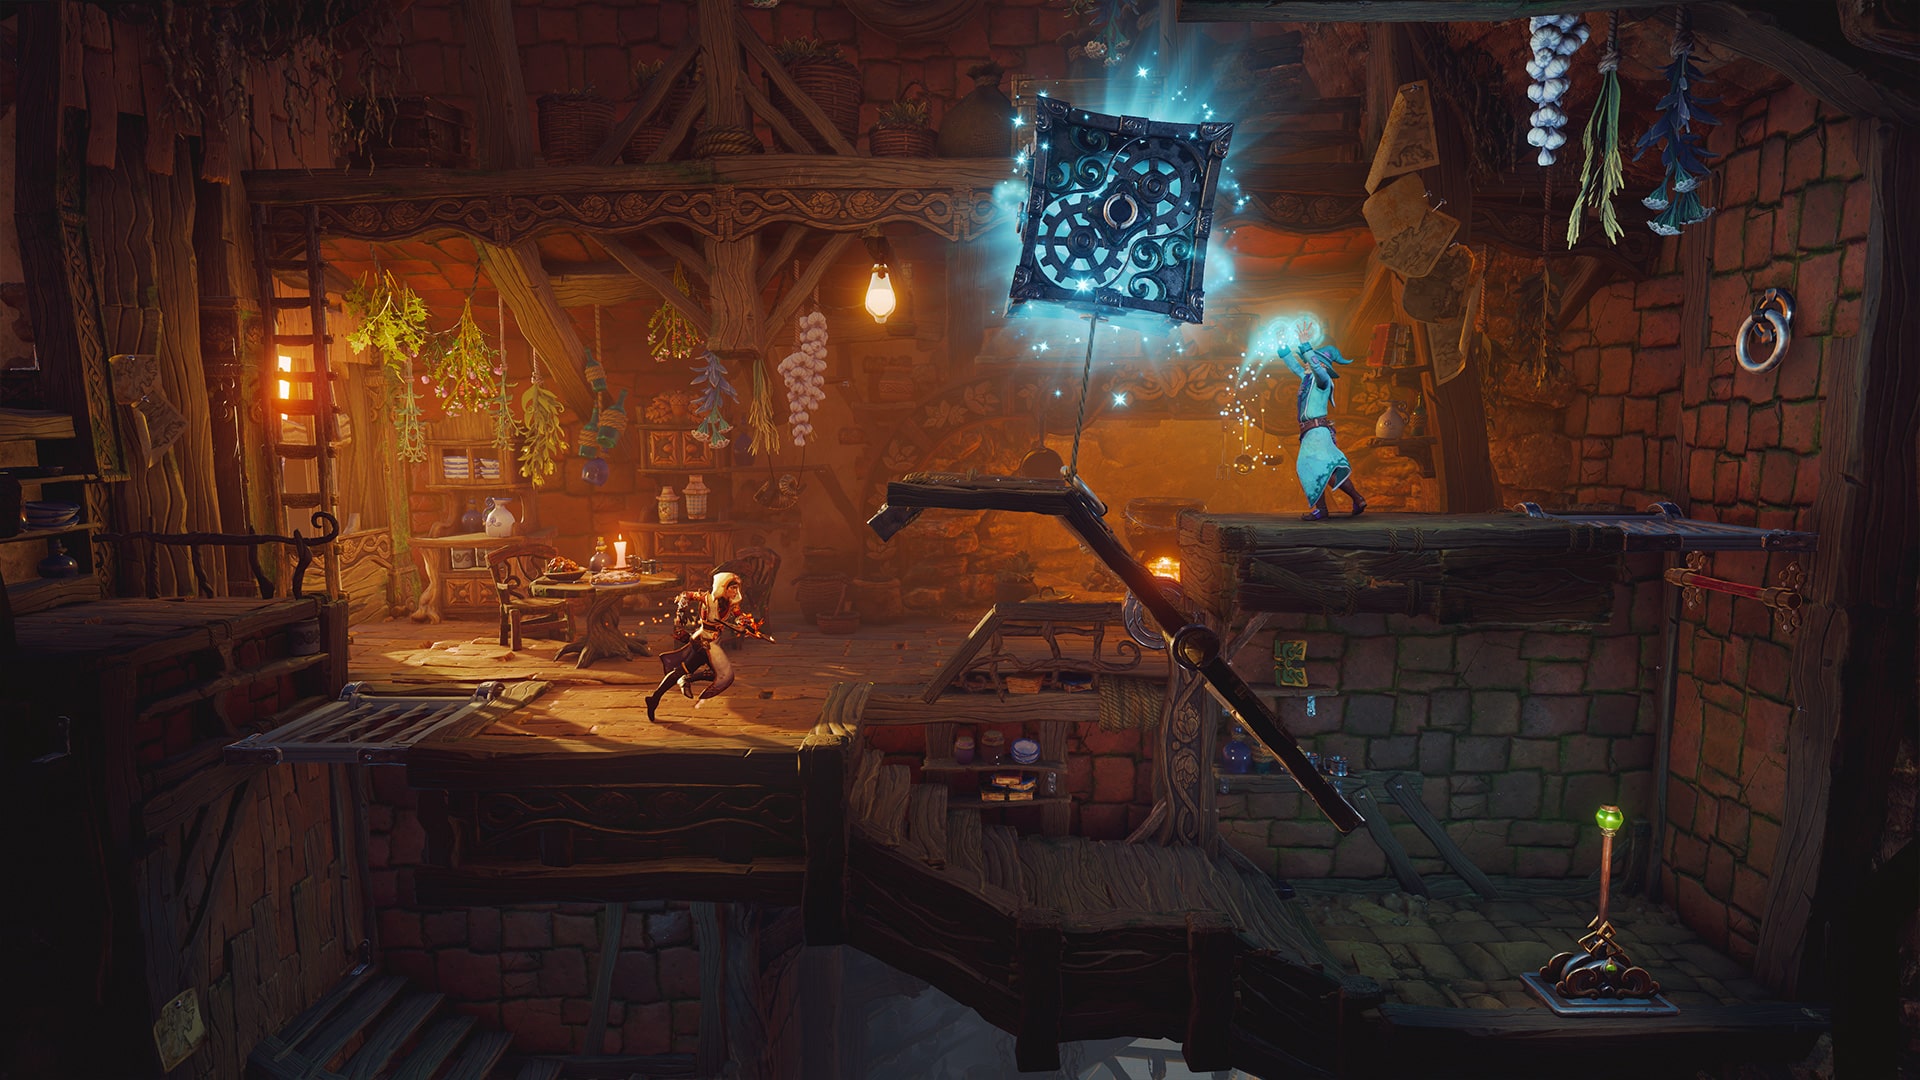 trine 4 ps store